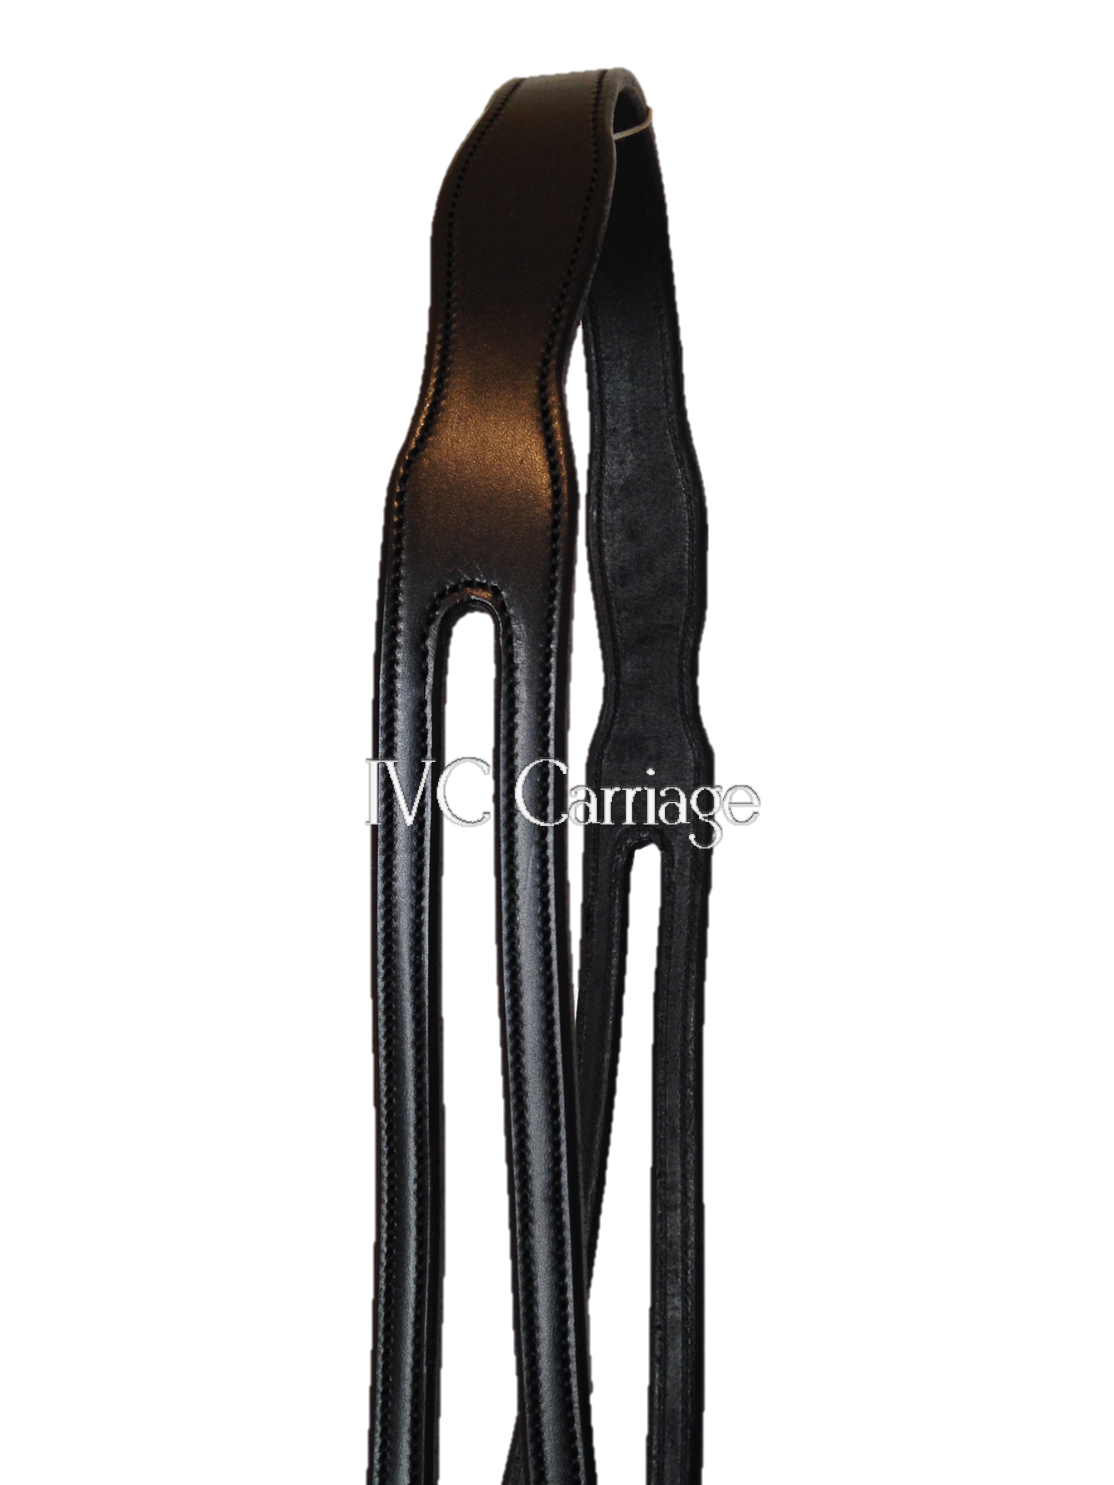 IVC Elite Leather Horse Harness Hip Strap | IVC Carriage